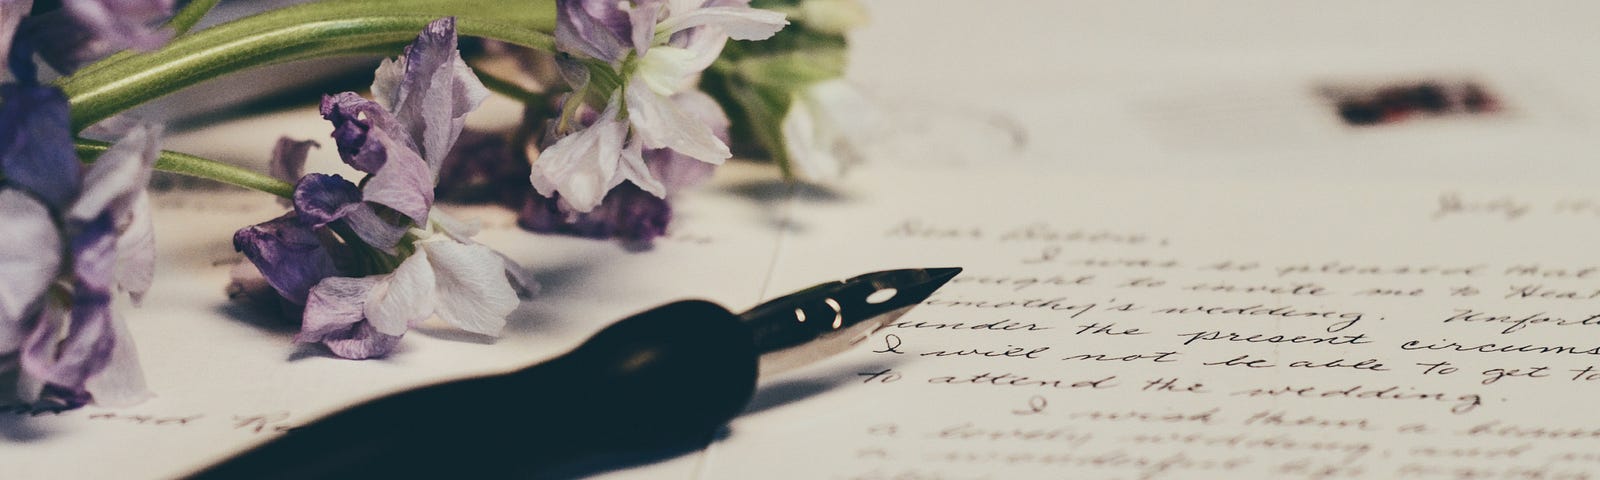 A fountain pen rests on a handwritten letter with some light purple flowers.